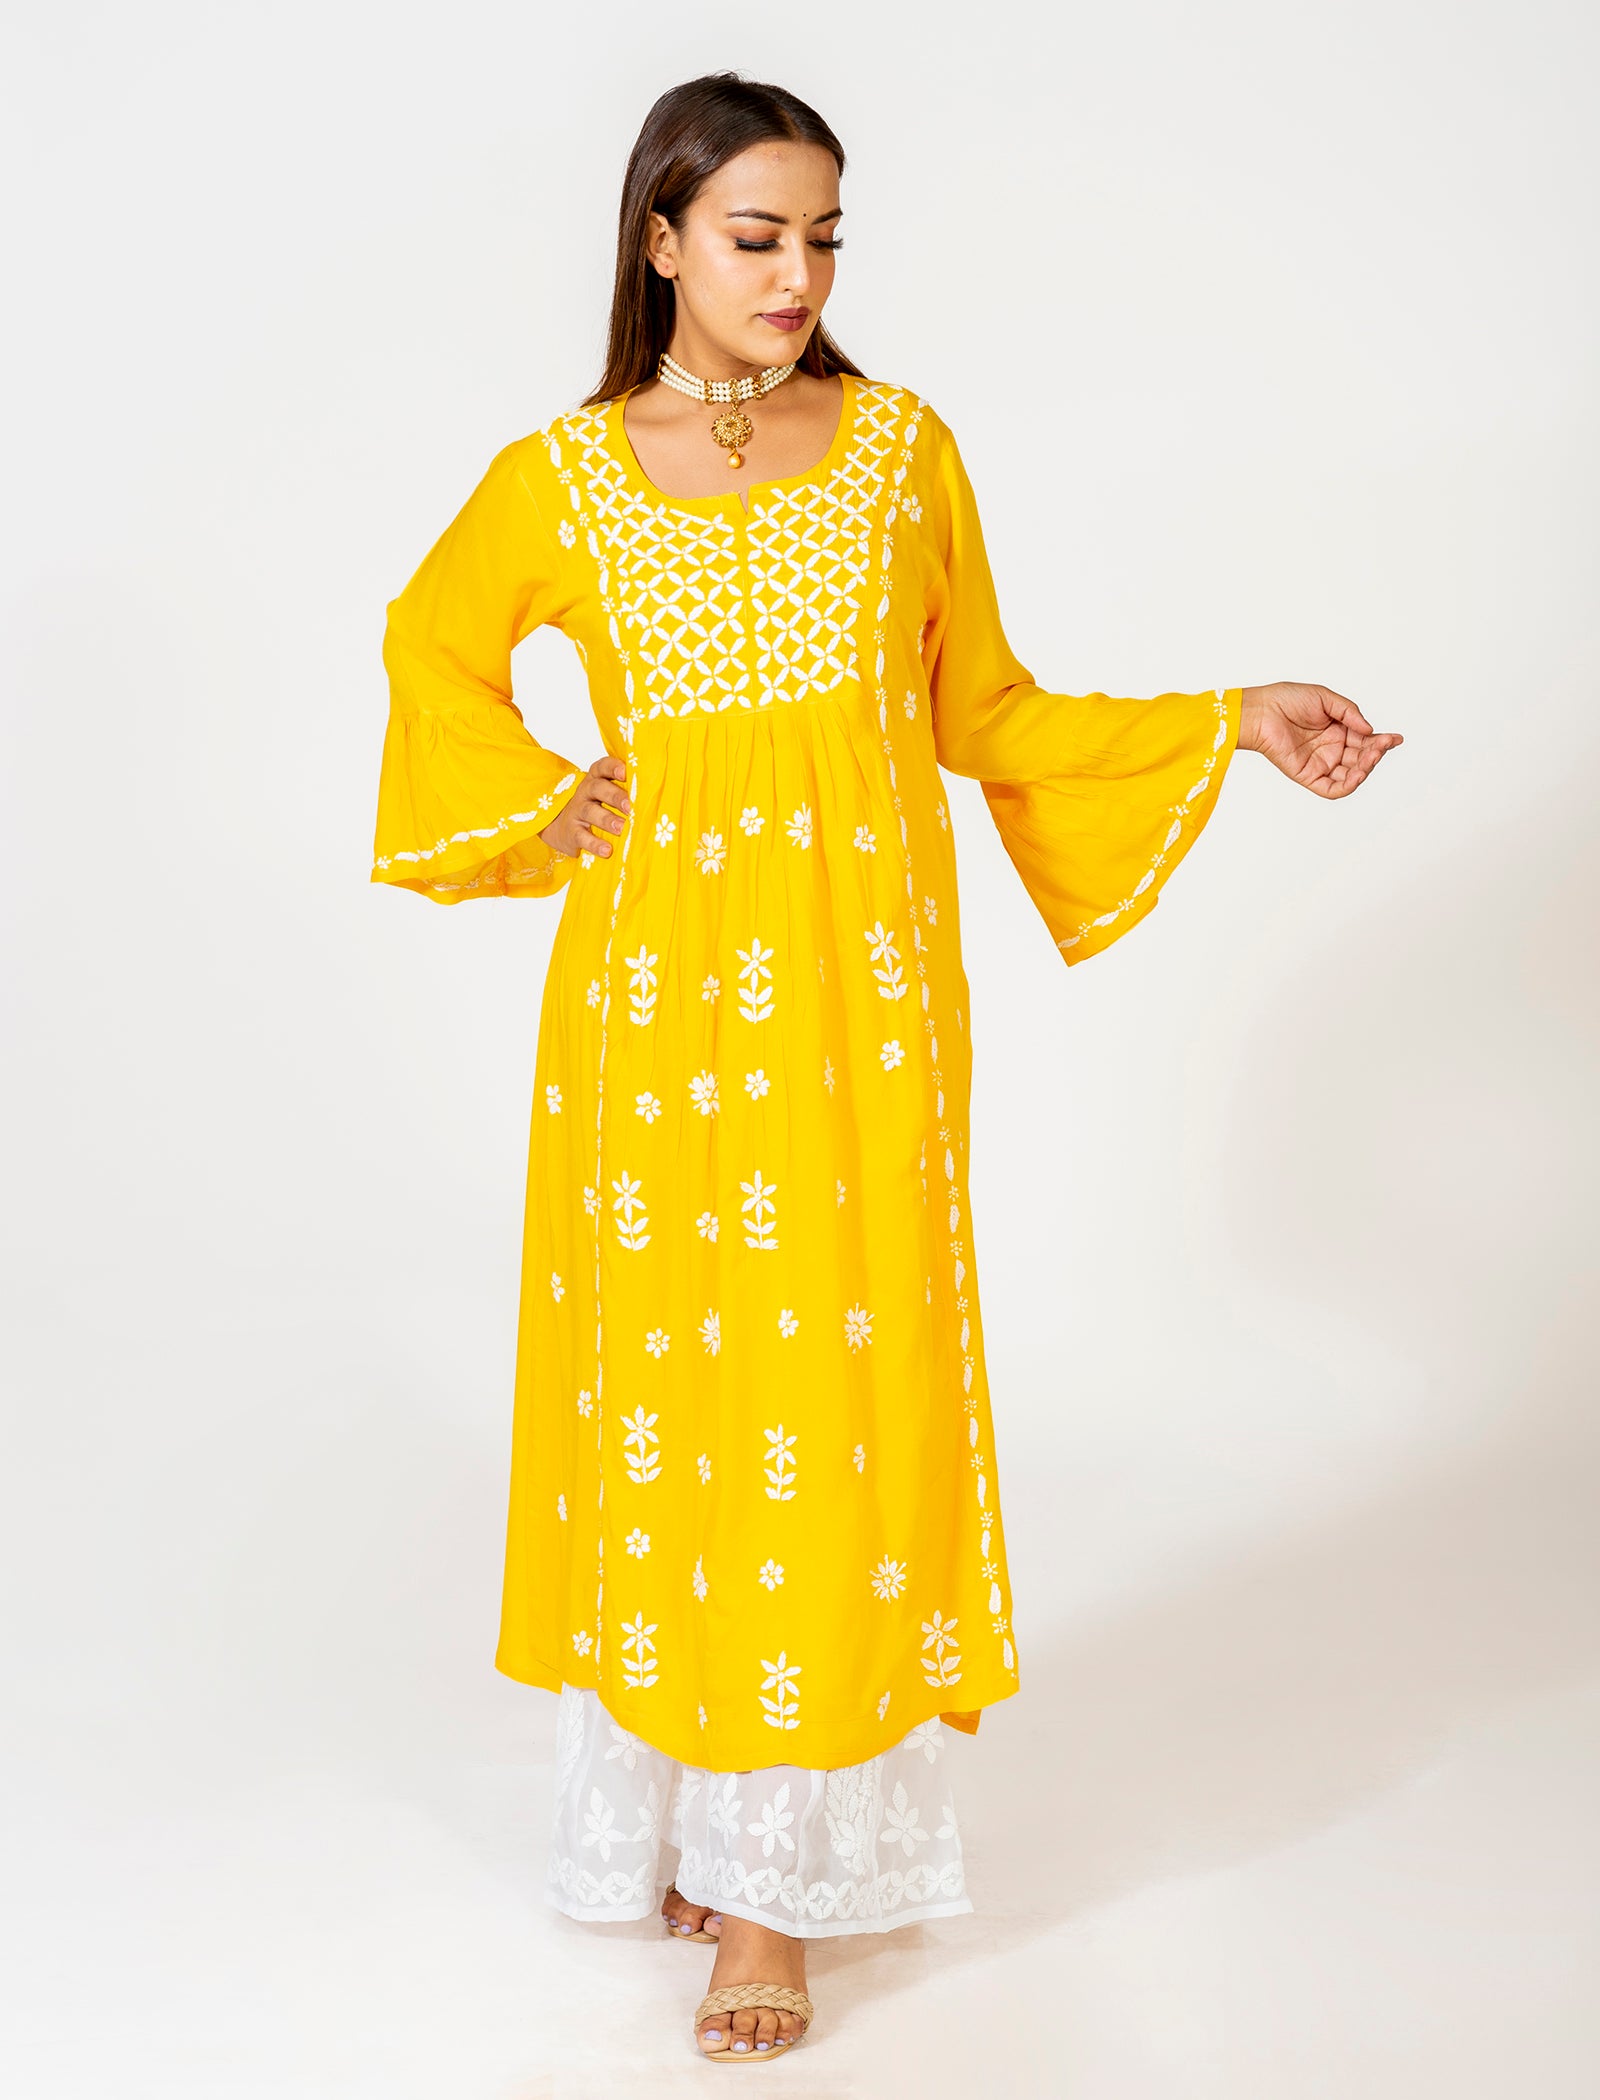 Buy Lucknowi noor Yellow Georgette Chikankari Kurti Women's Georgette Chikan  Kurti Full Sleeves / 2XL Size/Beautiful Chikan Embroidery All Over The Kurti  at Amazon.in